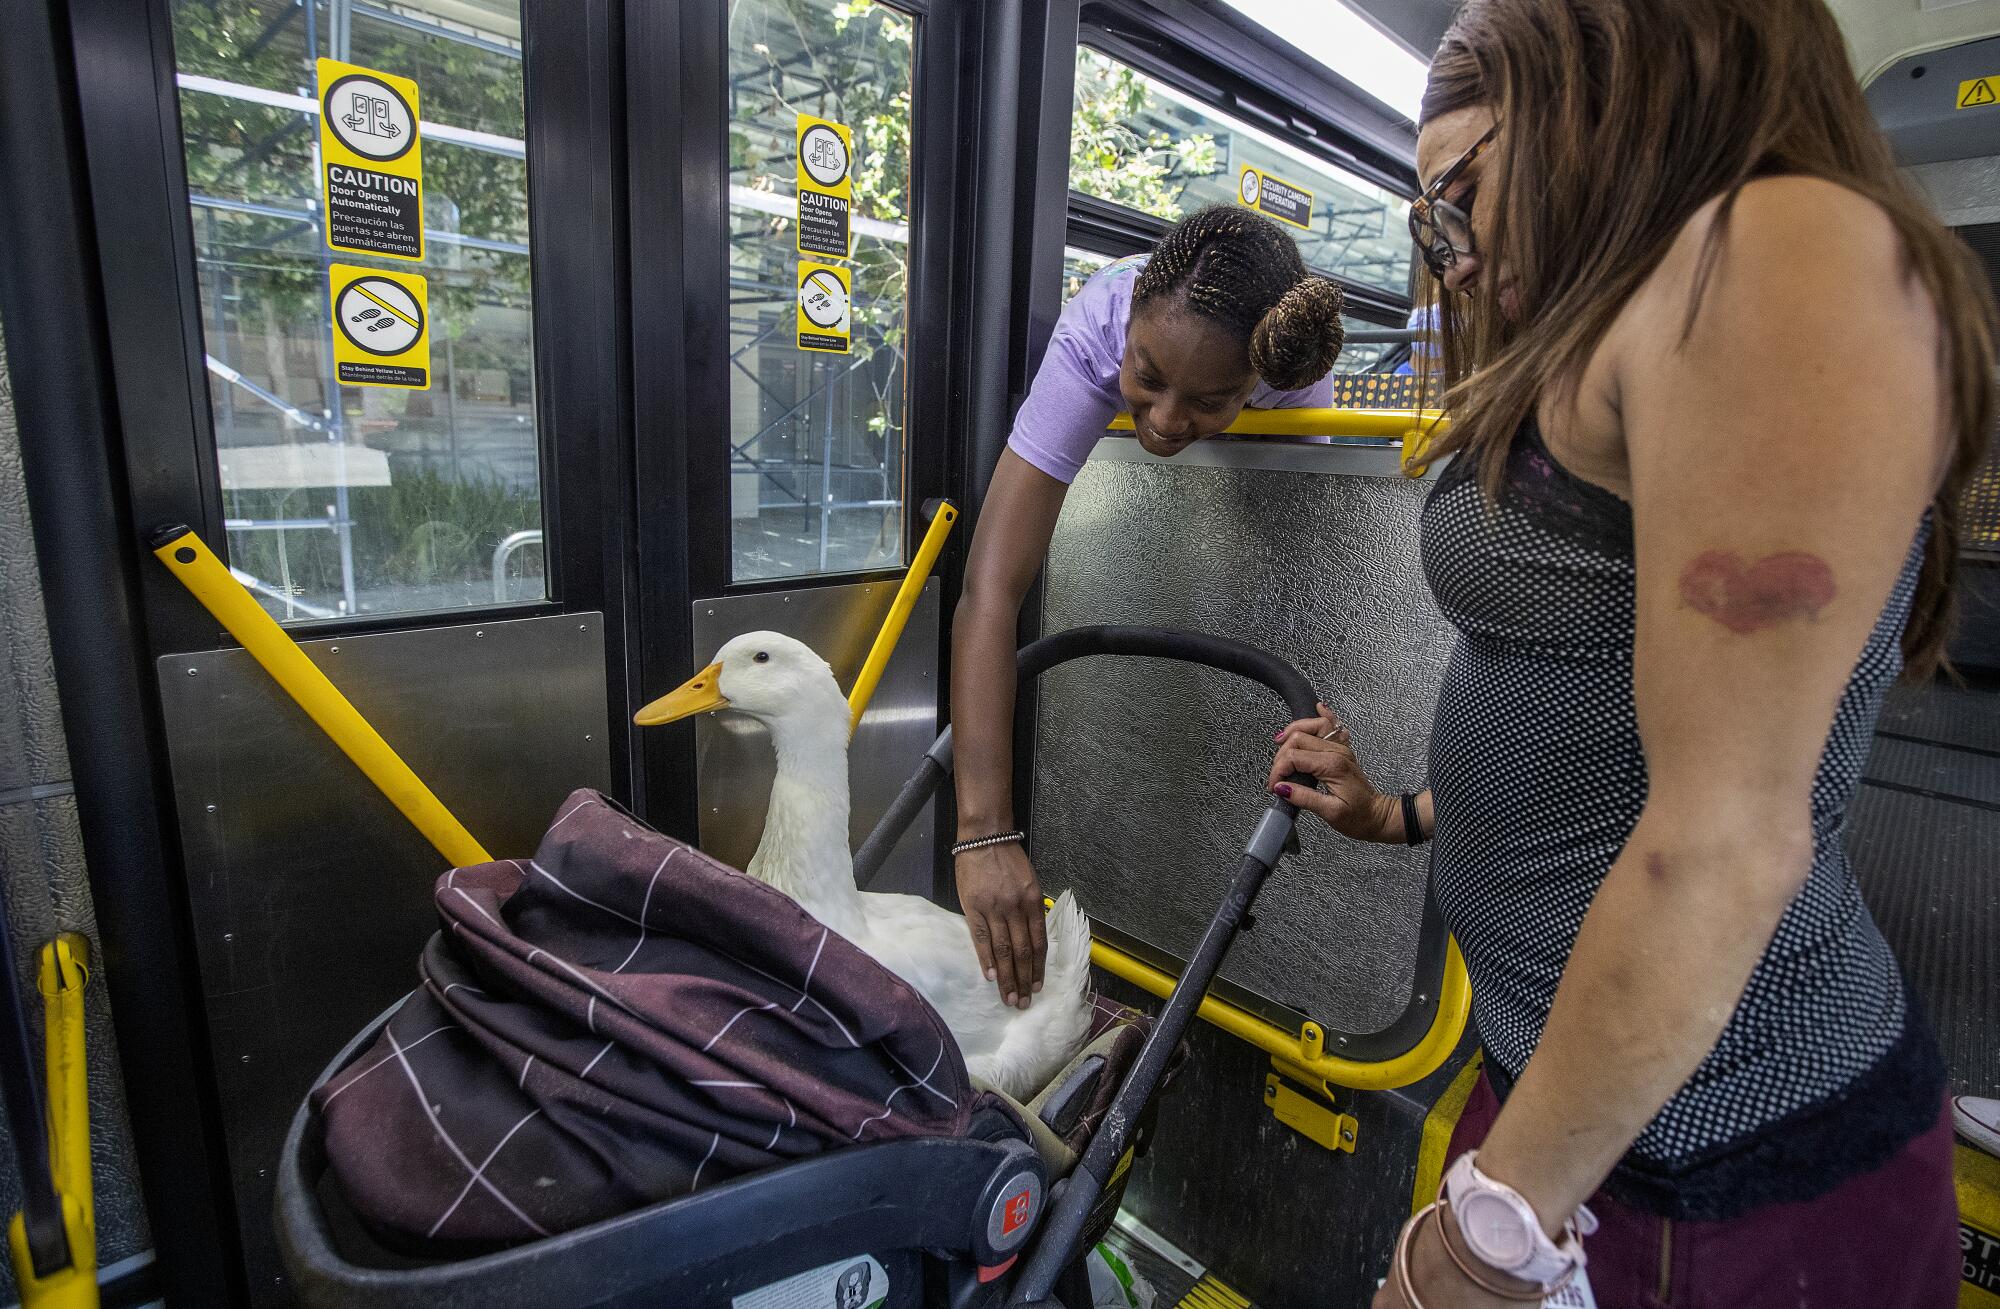 Naomi Blackwill, left, of Los Angeles, reaches down to pet Cardi D, while riding on a metro bus on 5th St. in downtown 